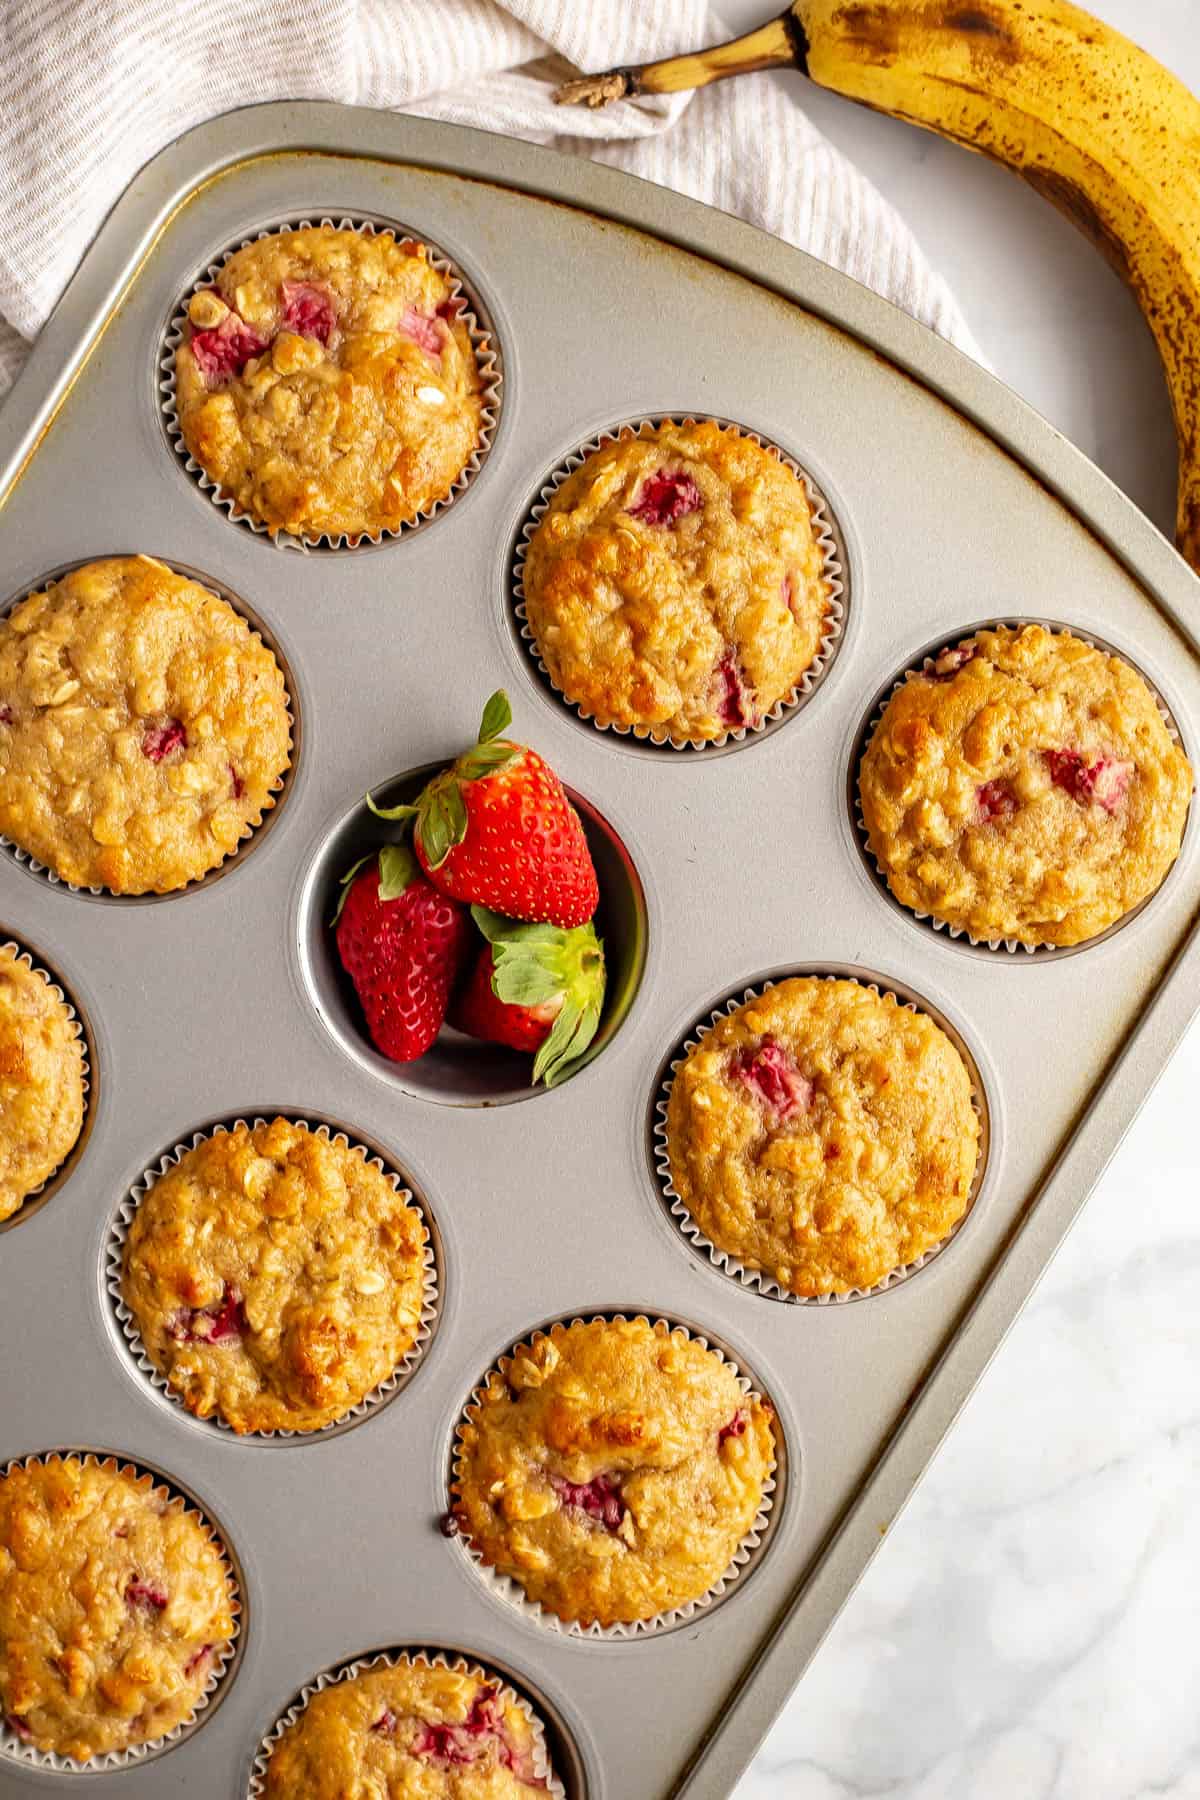 Baked strawberry banana muffins in a muffin tin with one cup filled with fresh strawberries.